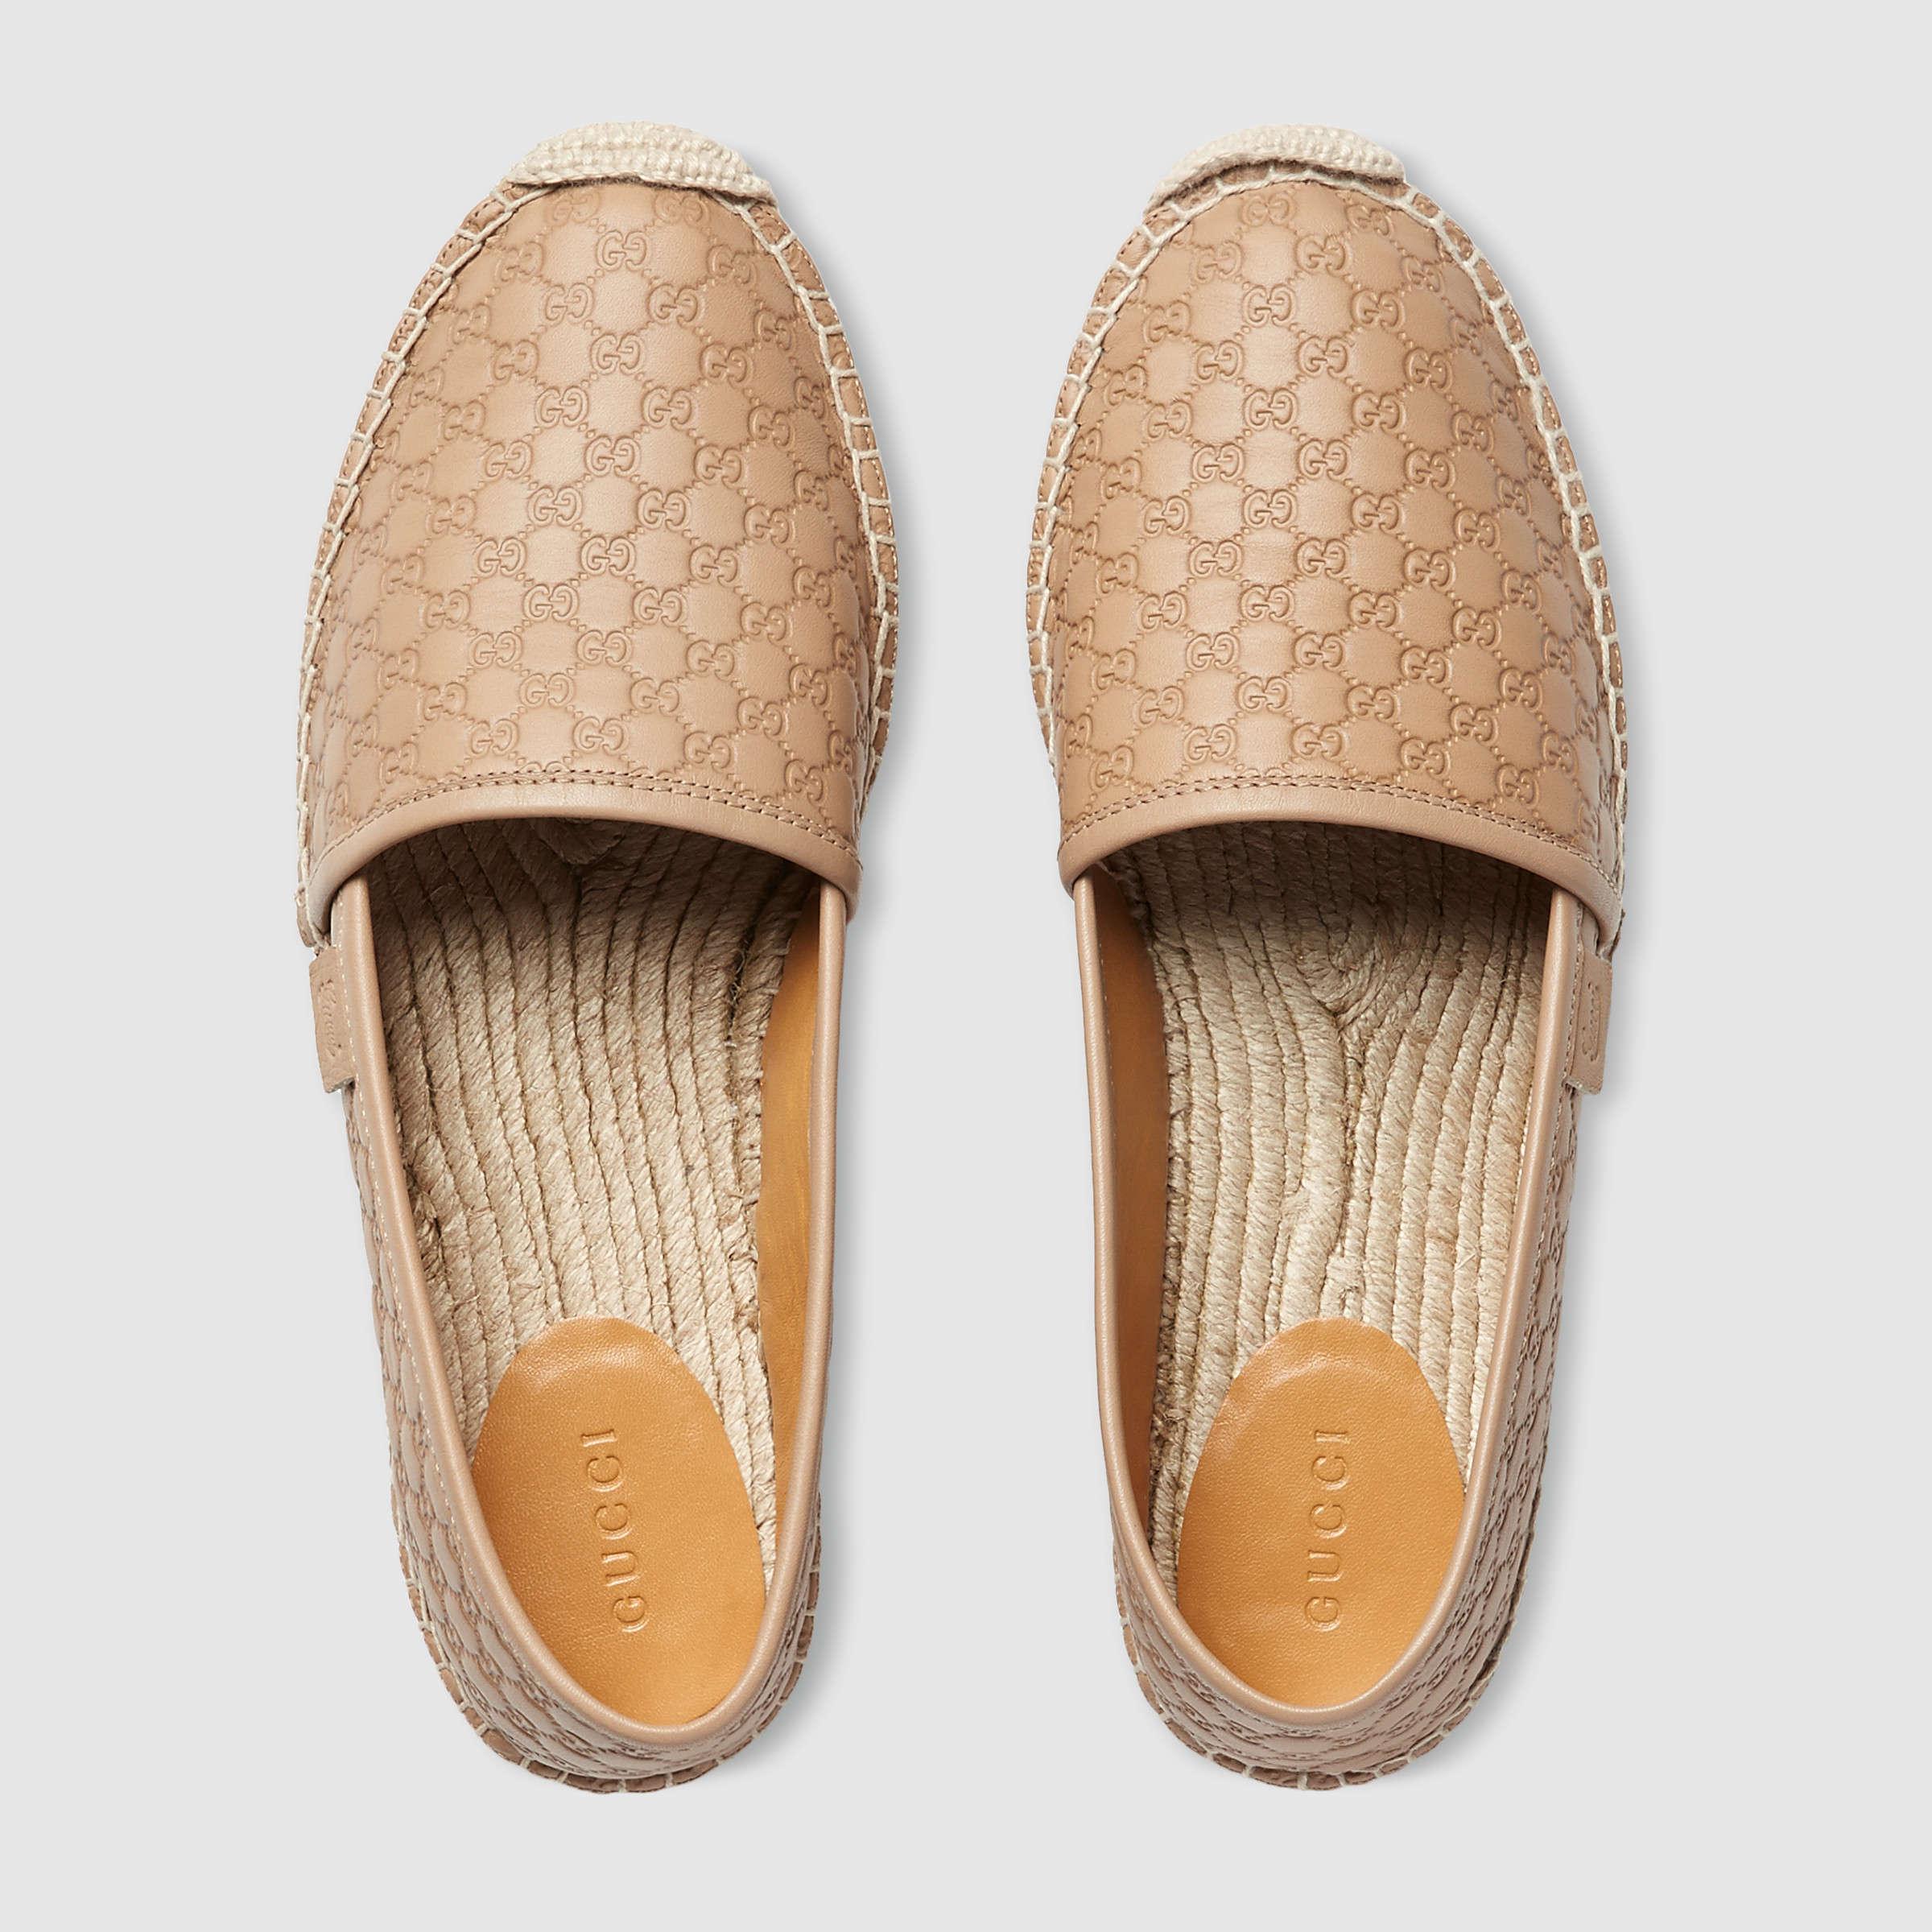 Lyst - Gucci Microssima Leather Espadrilles in Natural